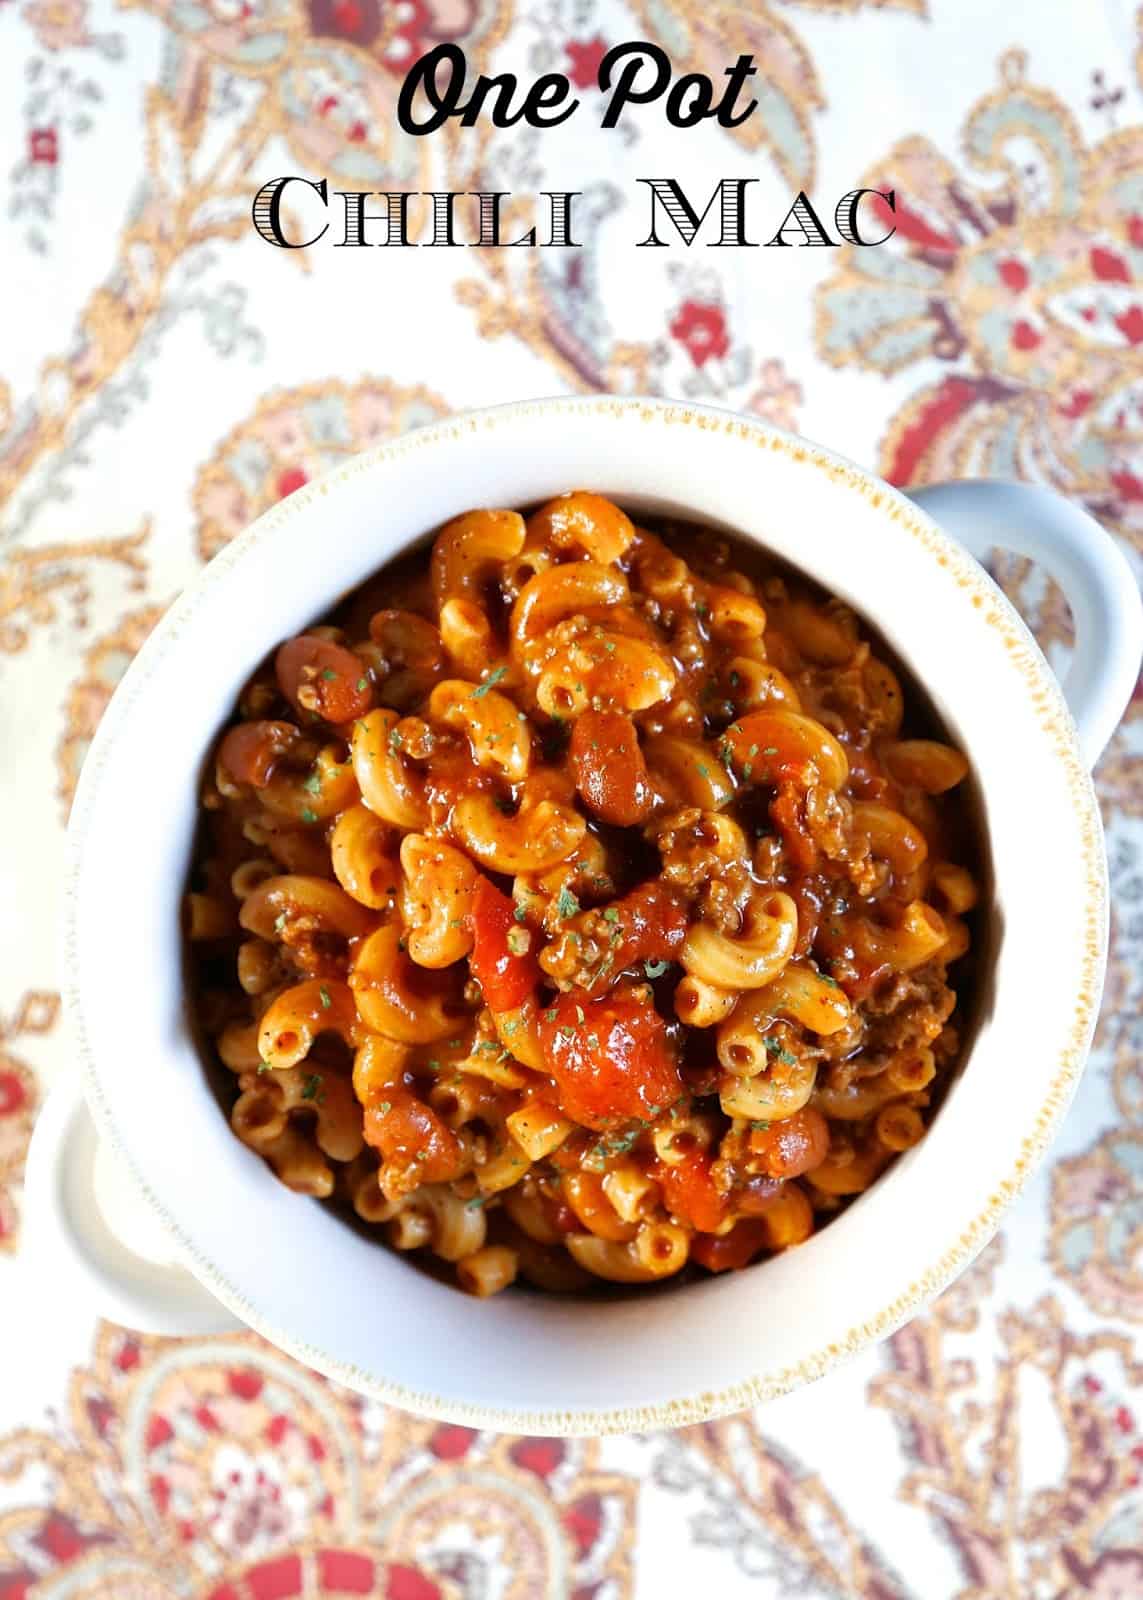 One Pot Chili Mac {No Boil} - chili and pasta simmered in the same pot! No need to precook the pasta! Great quick and easy weeknight meal!